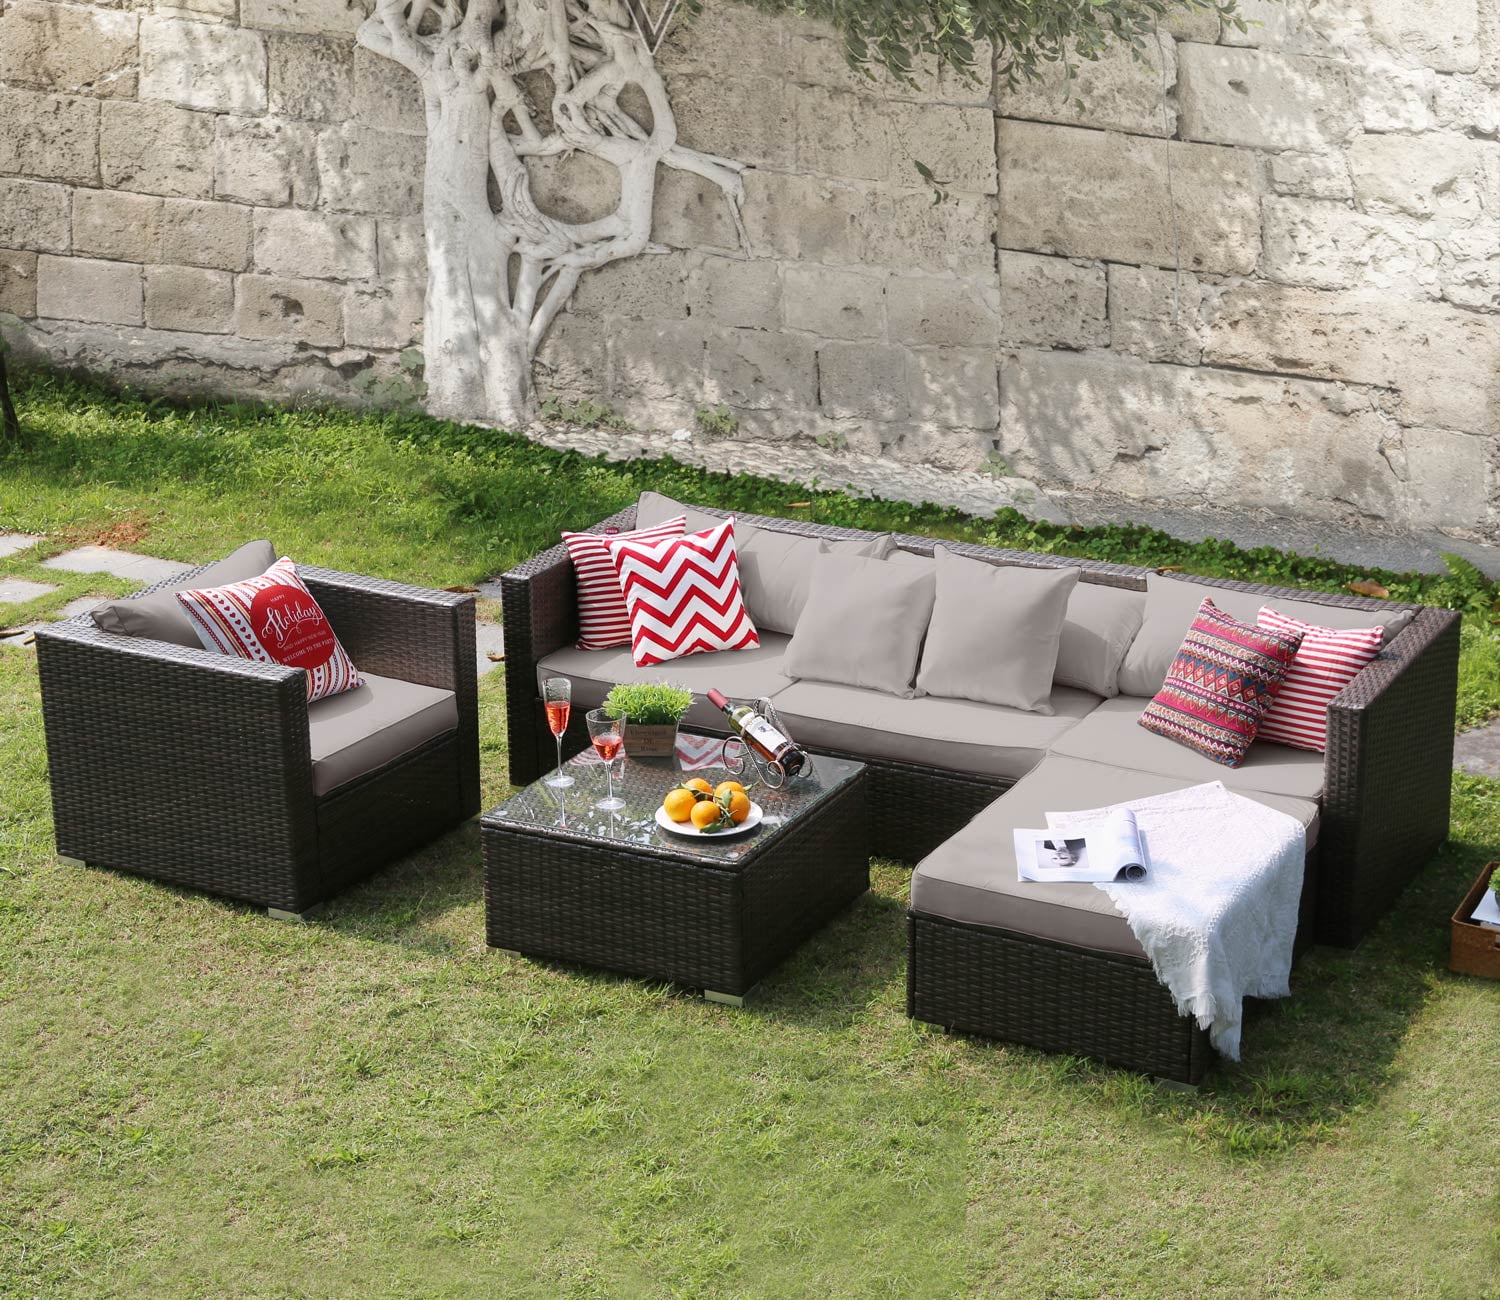 Tribesigns Outdoor Furniture Sectional Sofa Set, 6 PCS Rattan Sofa & Cushions Set for Patio, Yard, Grass Ground, Poolside